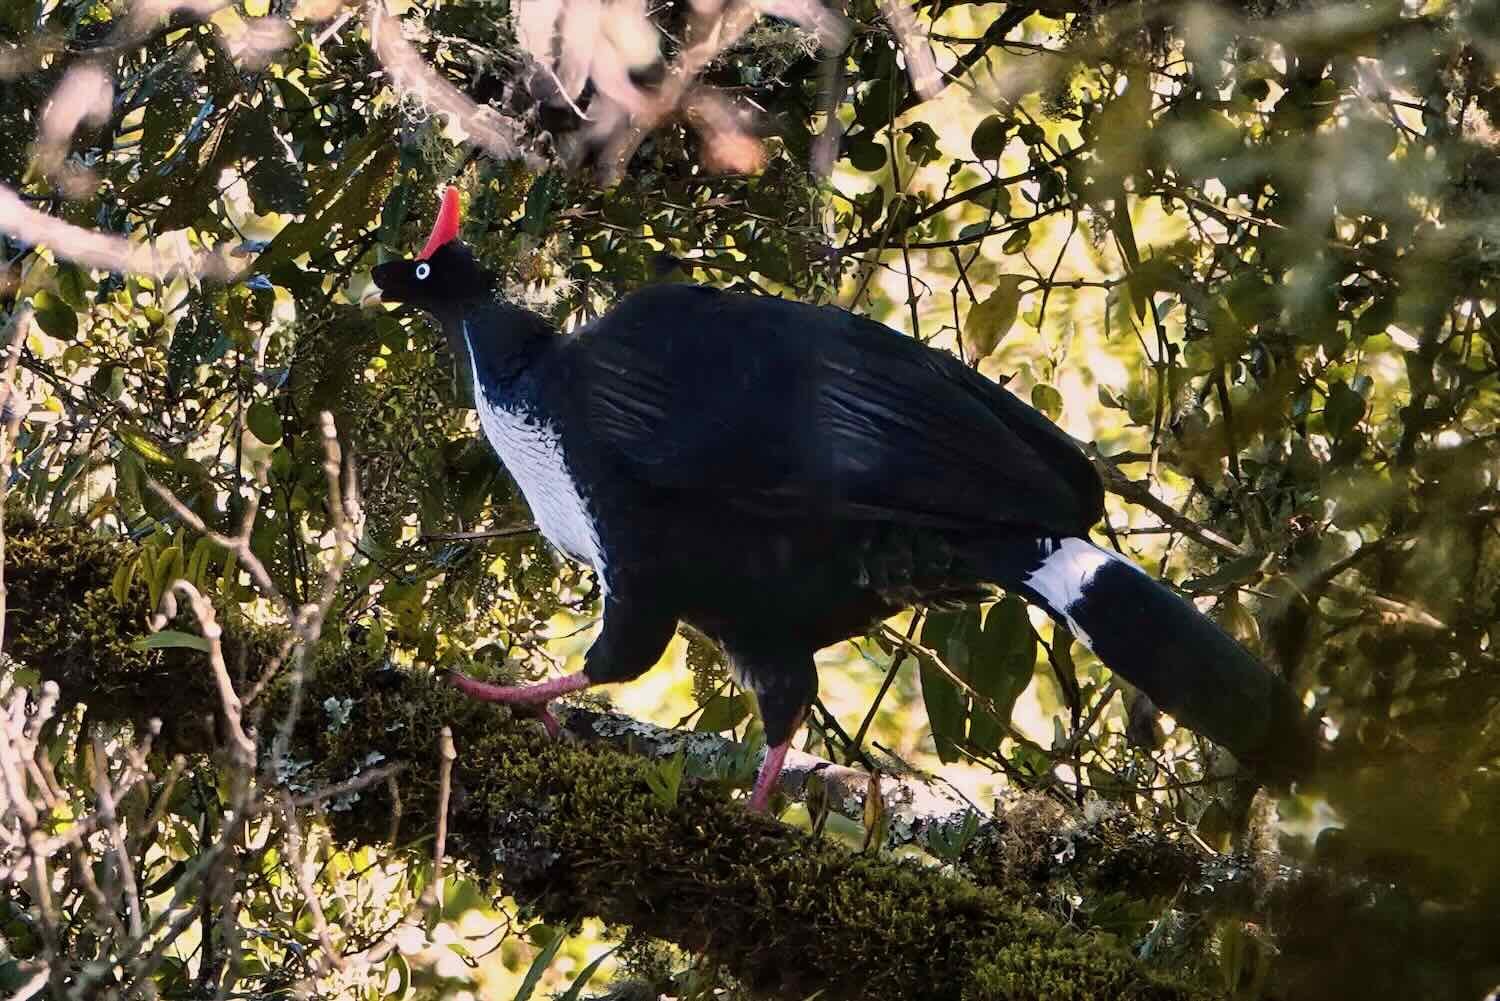 Horned guans have really big bodies